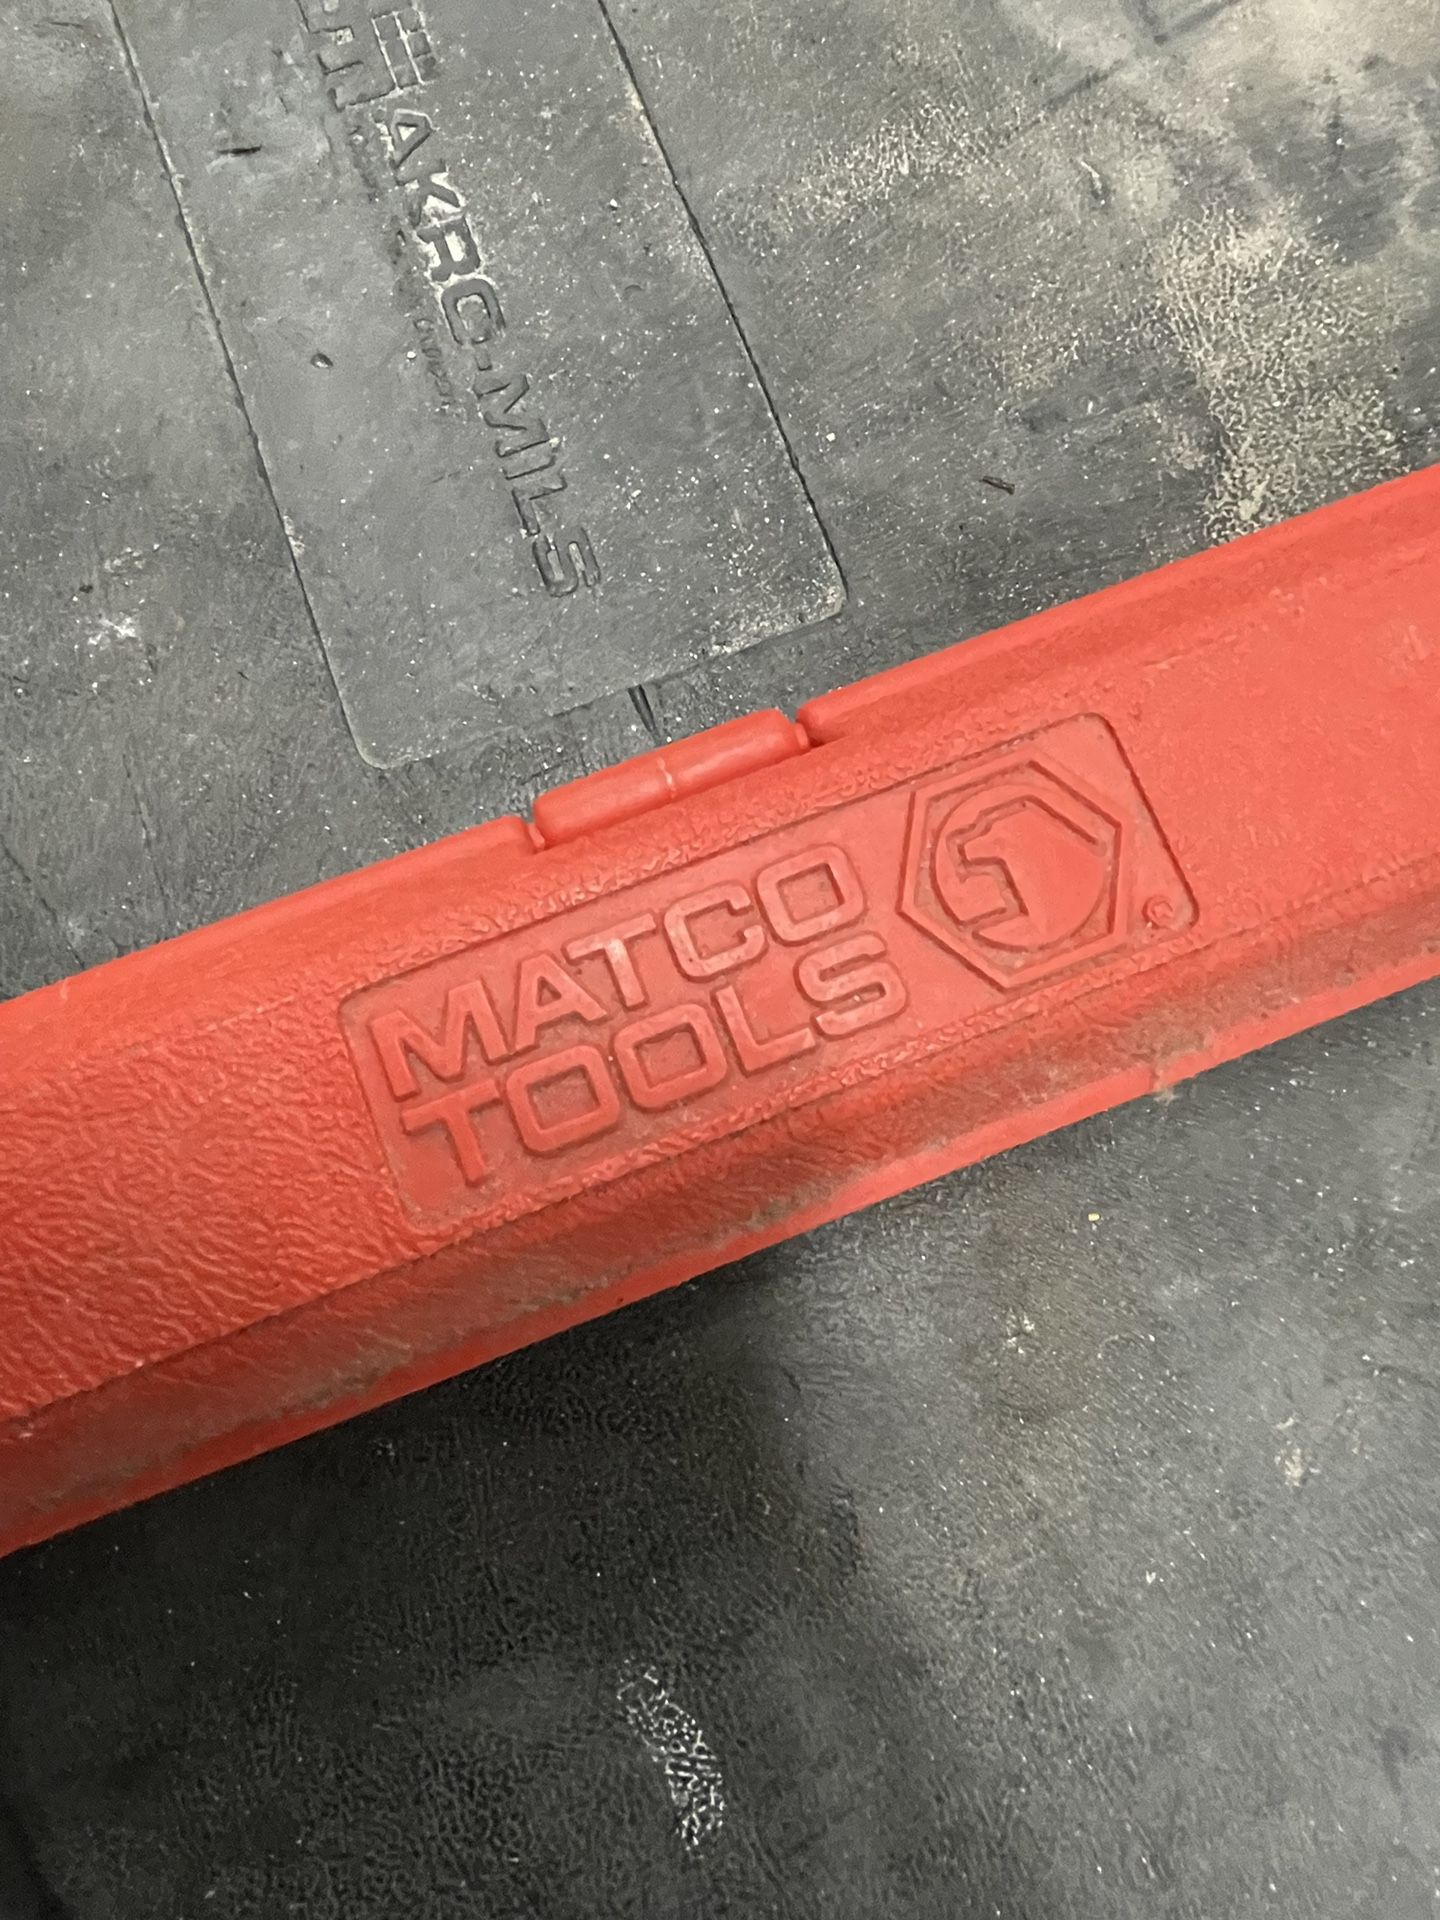 Matco T150FR 1/2” torque wrench